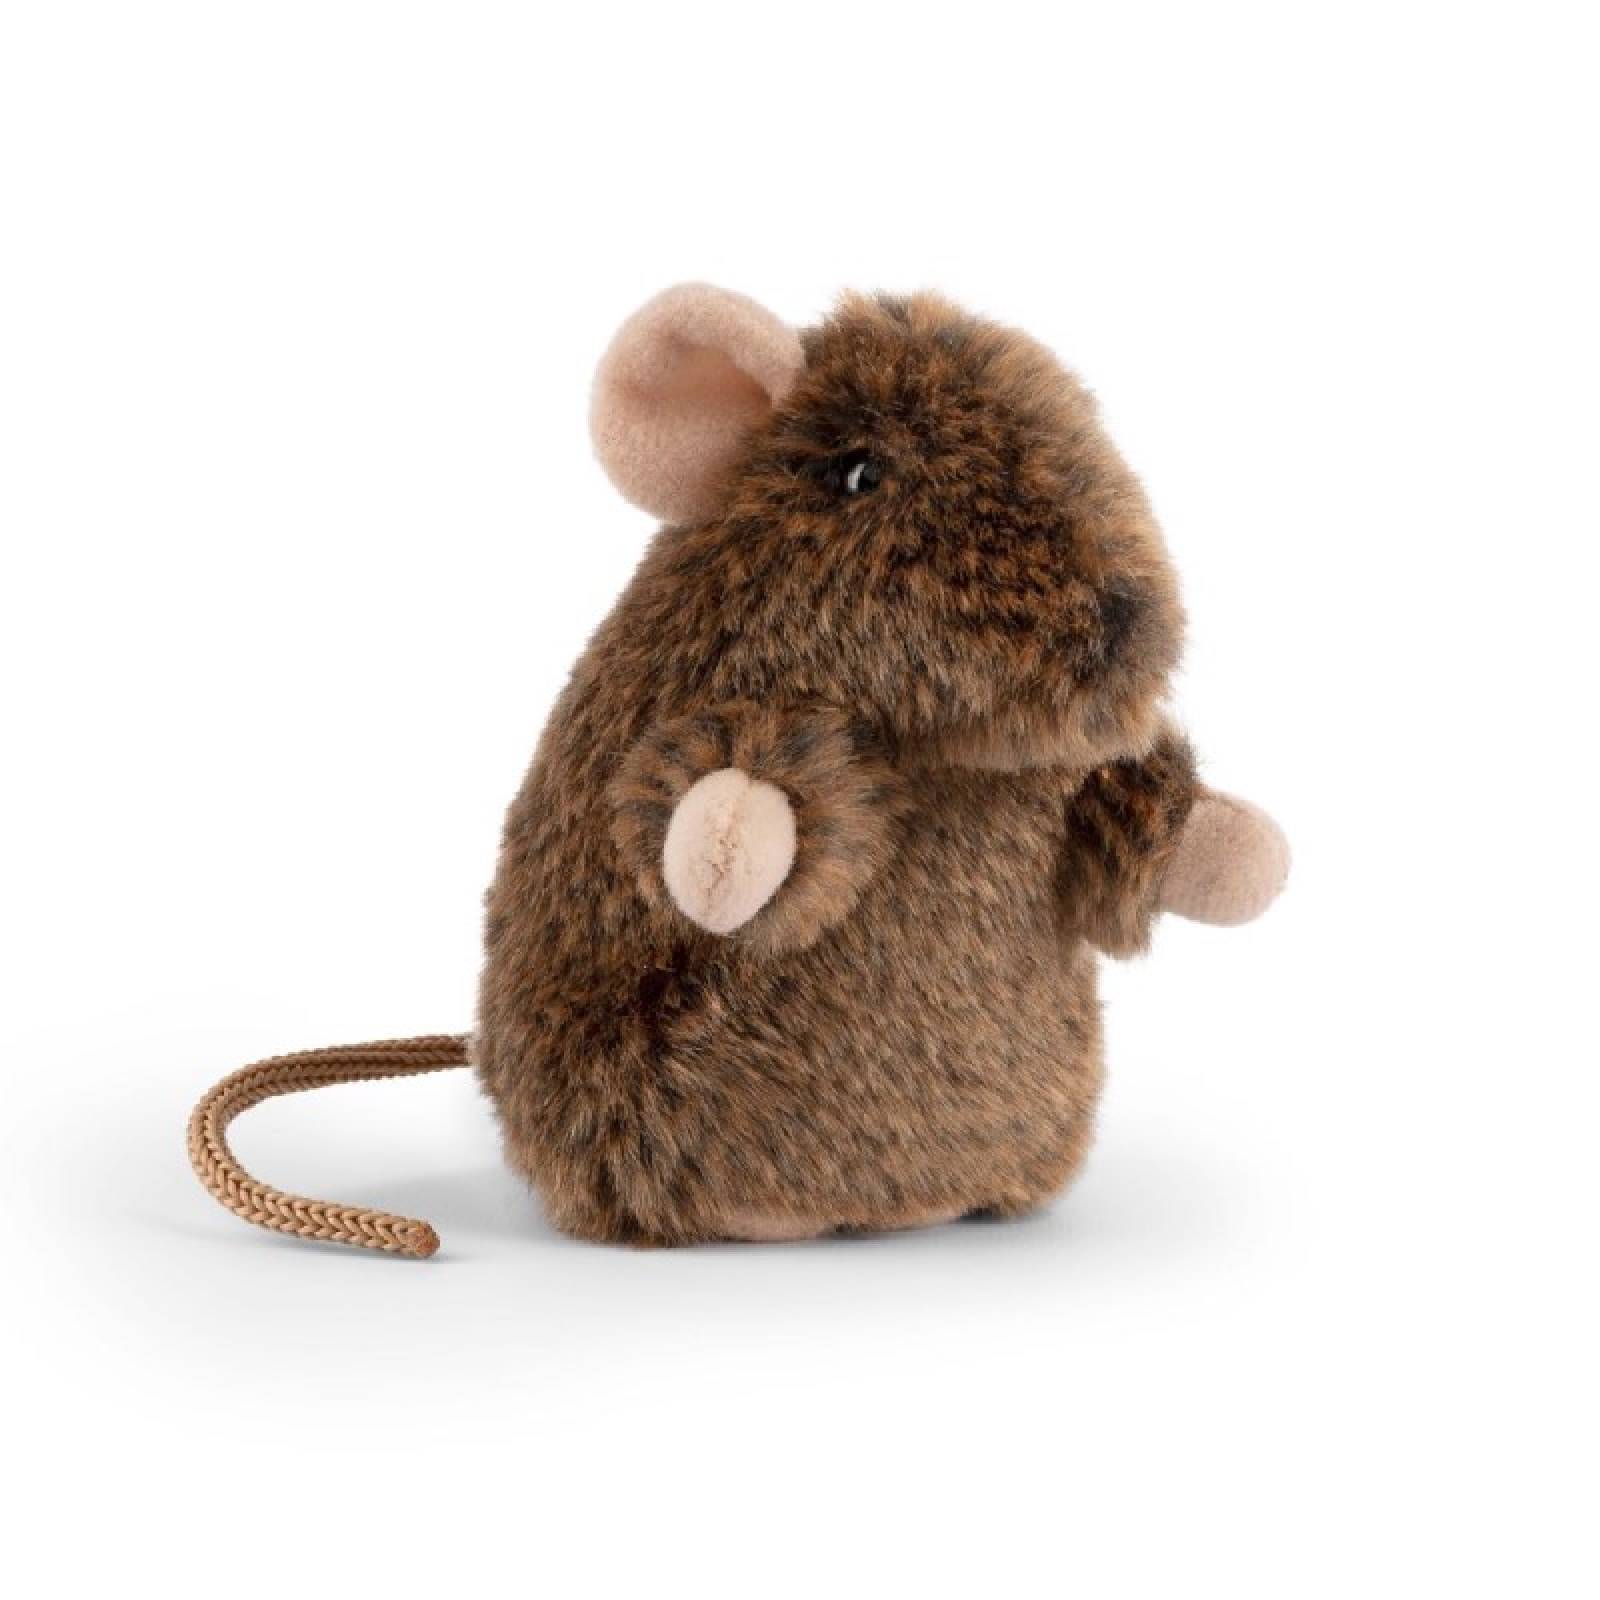 Small Sitting Mouse Soft Toy 0+